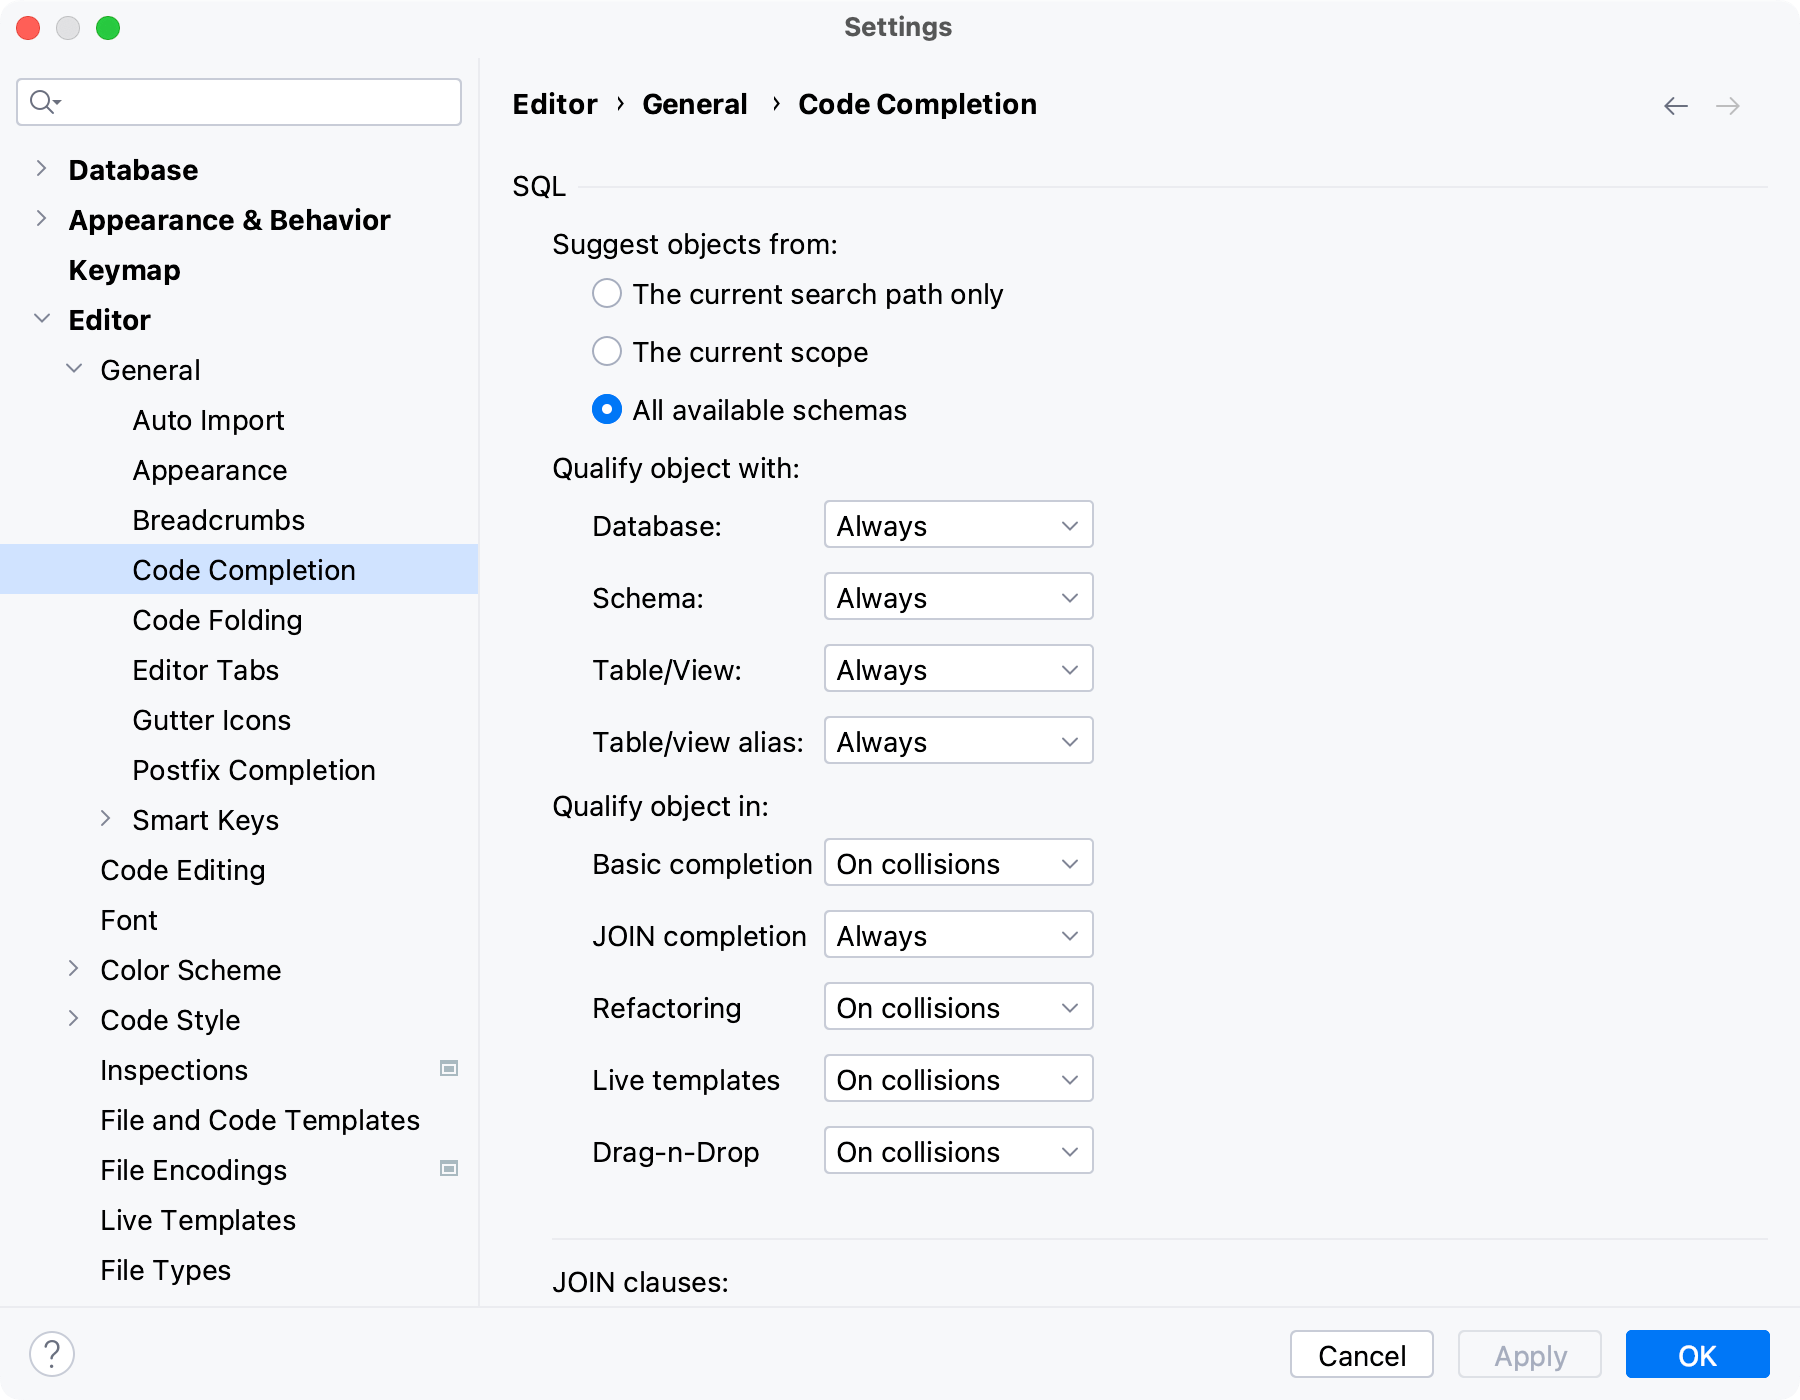 Object qualification settings